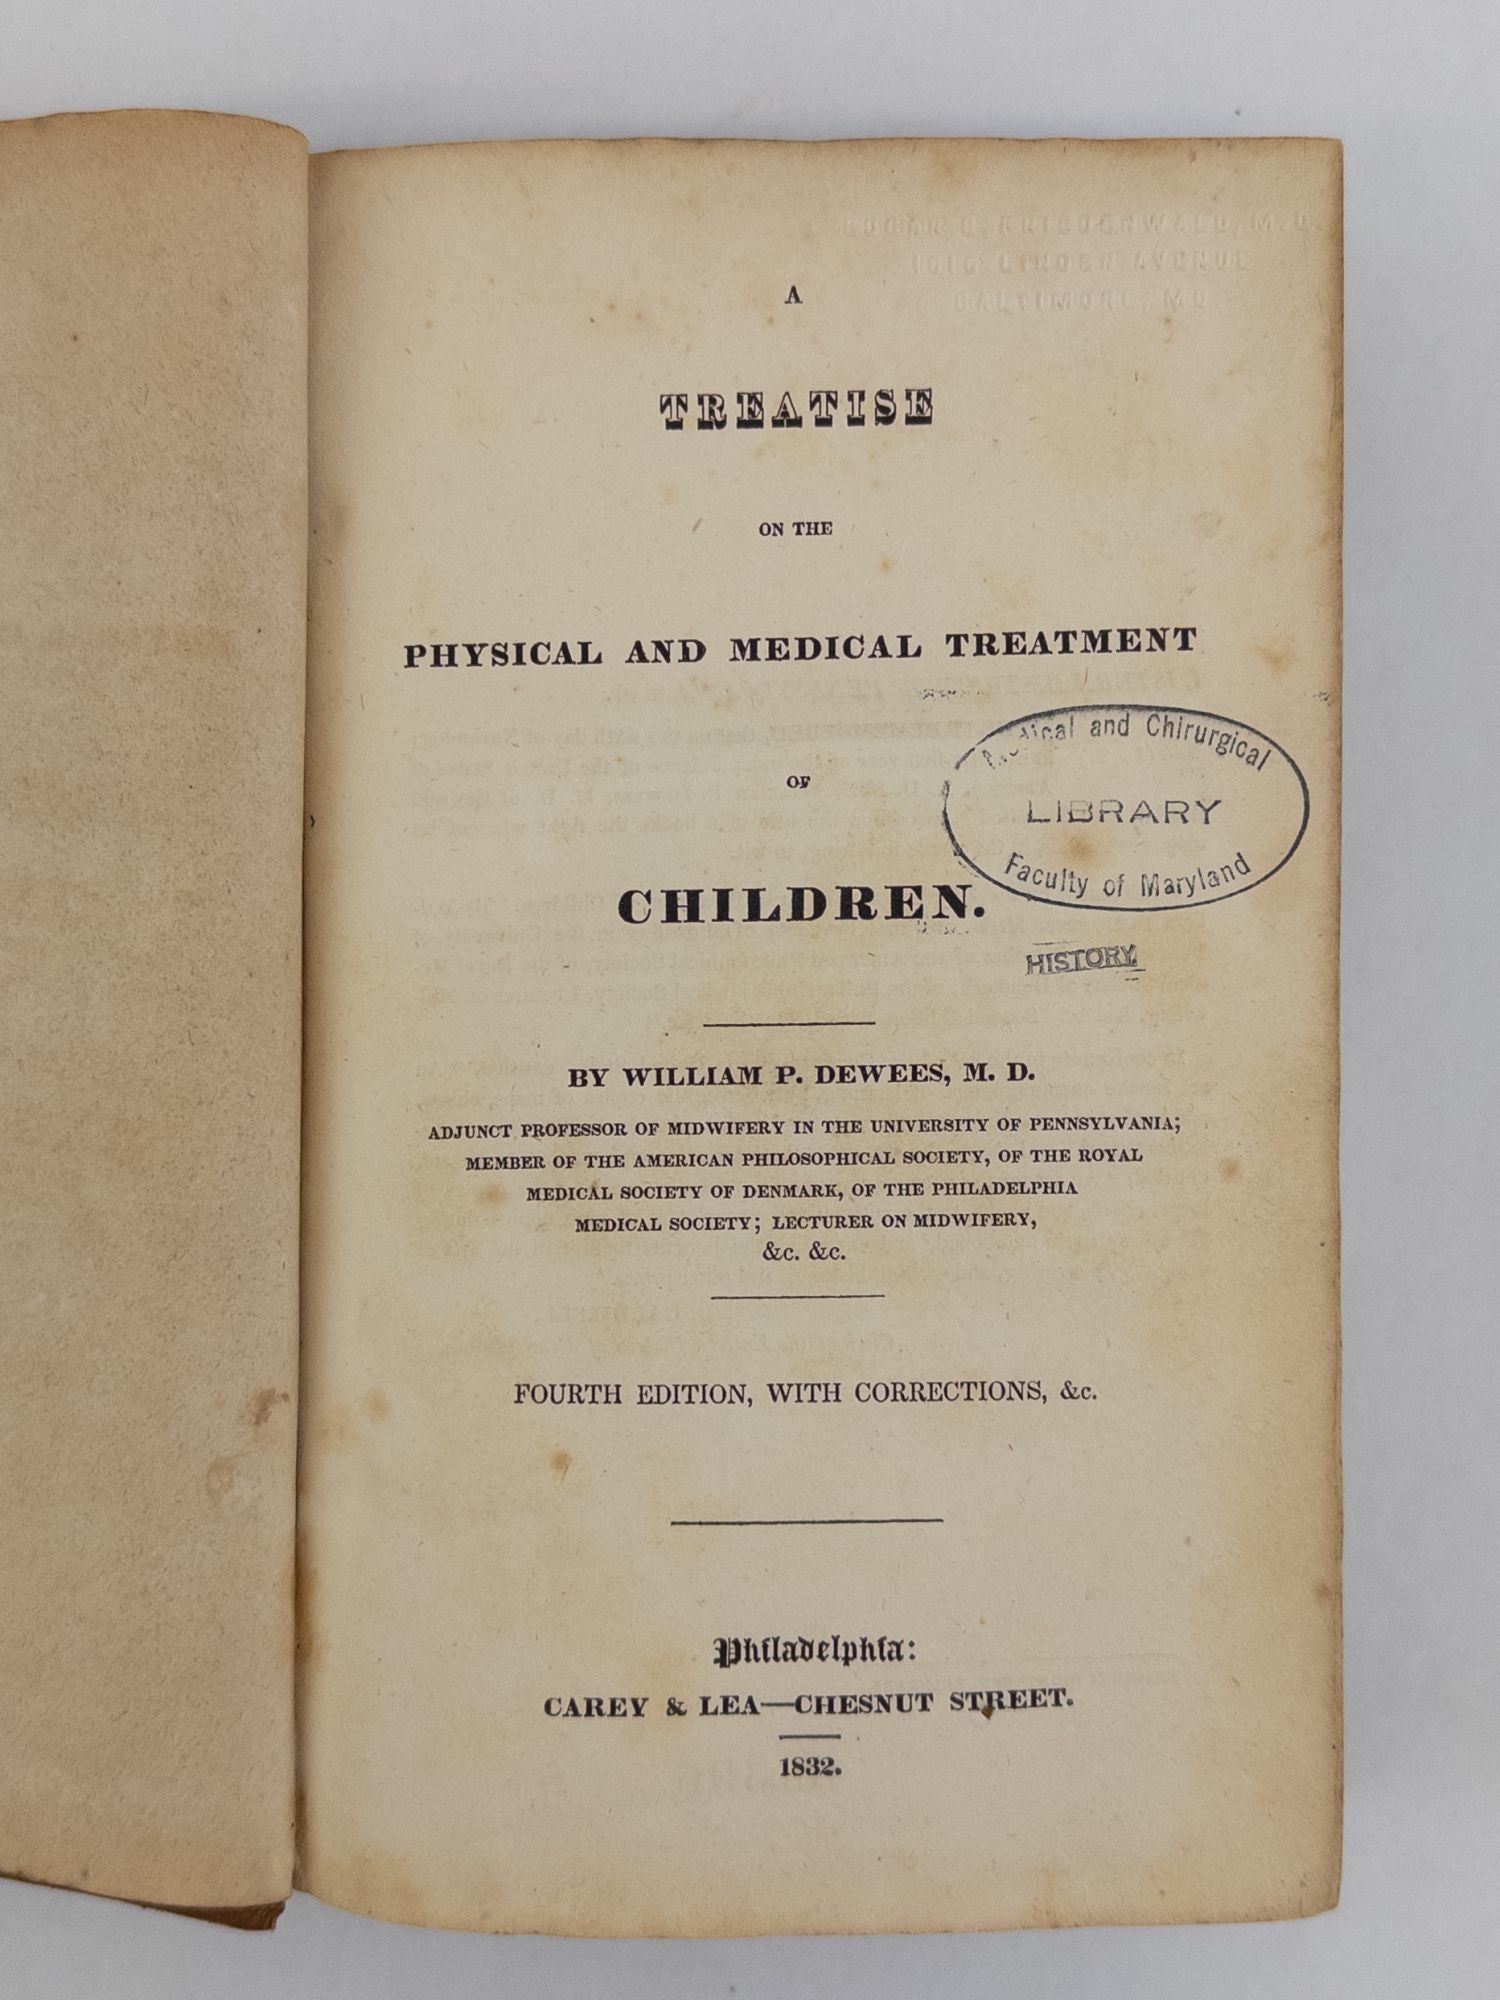 Product Image for A TREATISE ON THE PHYSICAL AND MEDICAL TREATMENT OF CHILDREN